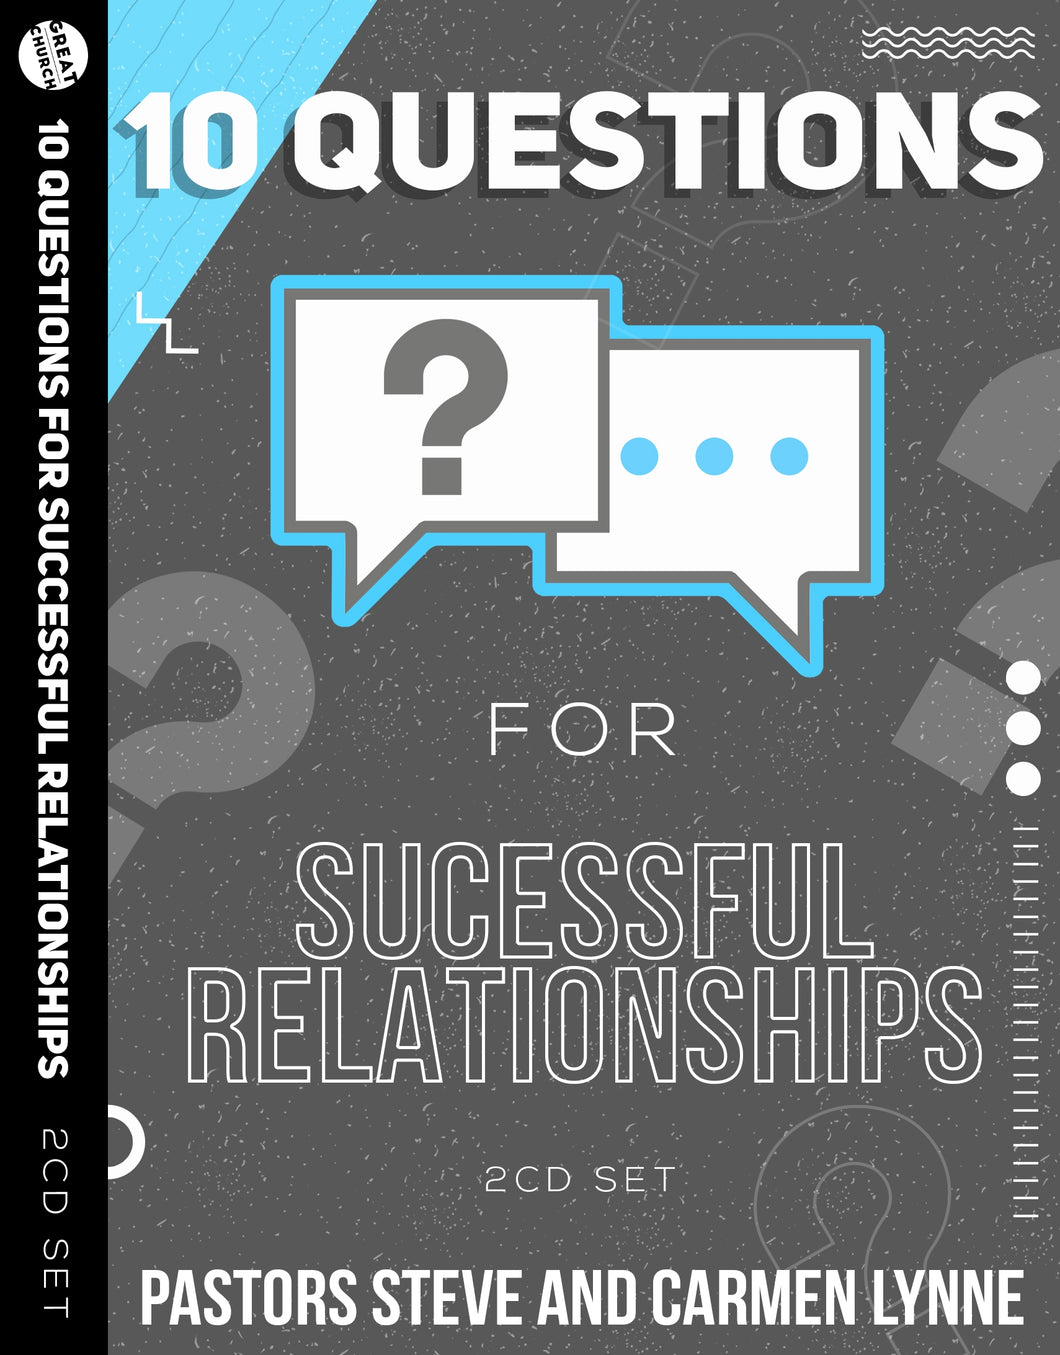 10 Questions for successful relationships